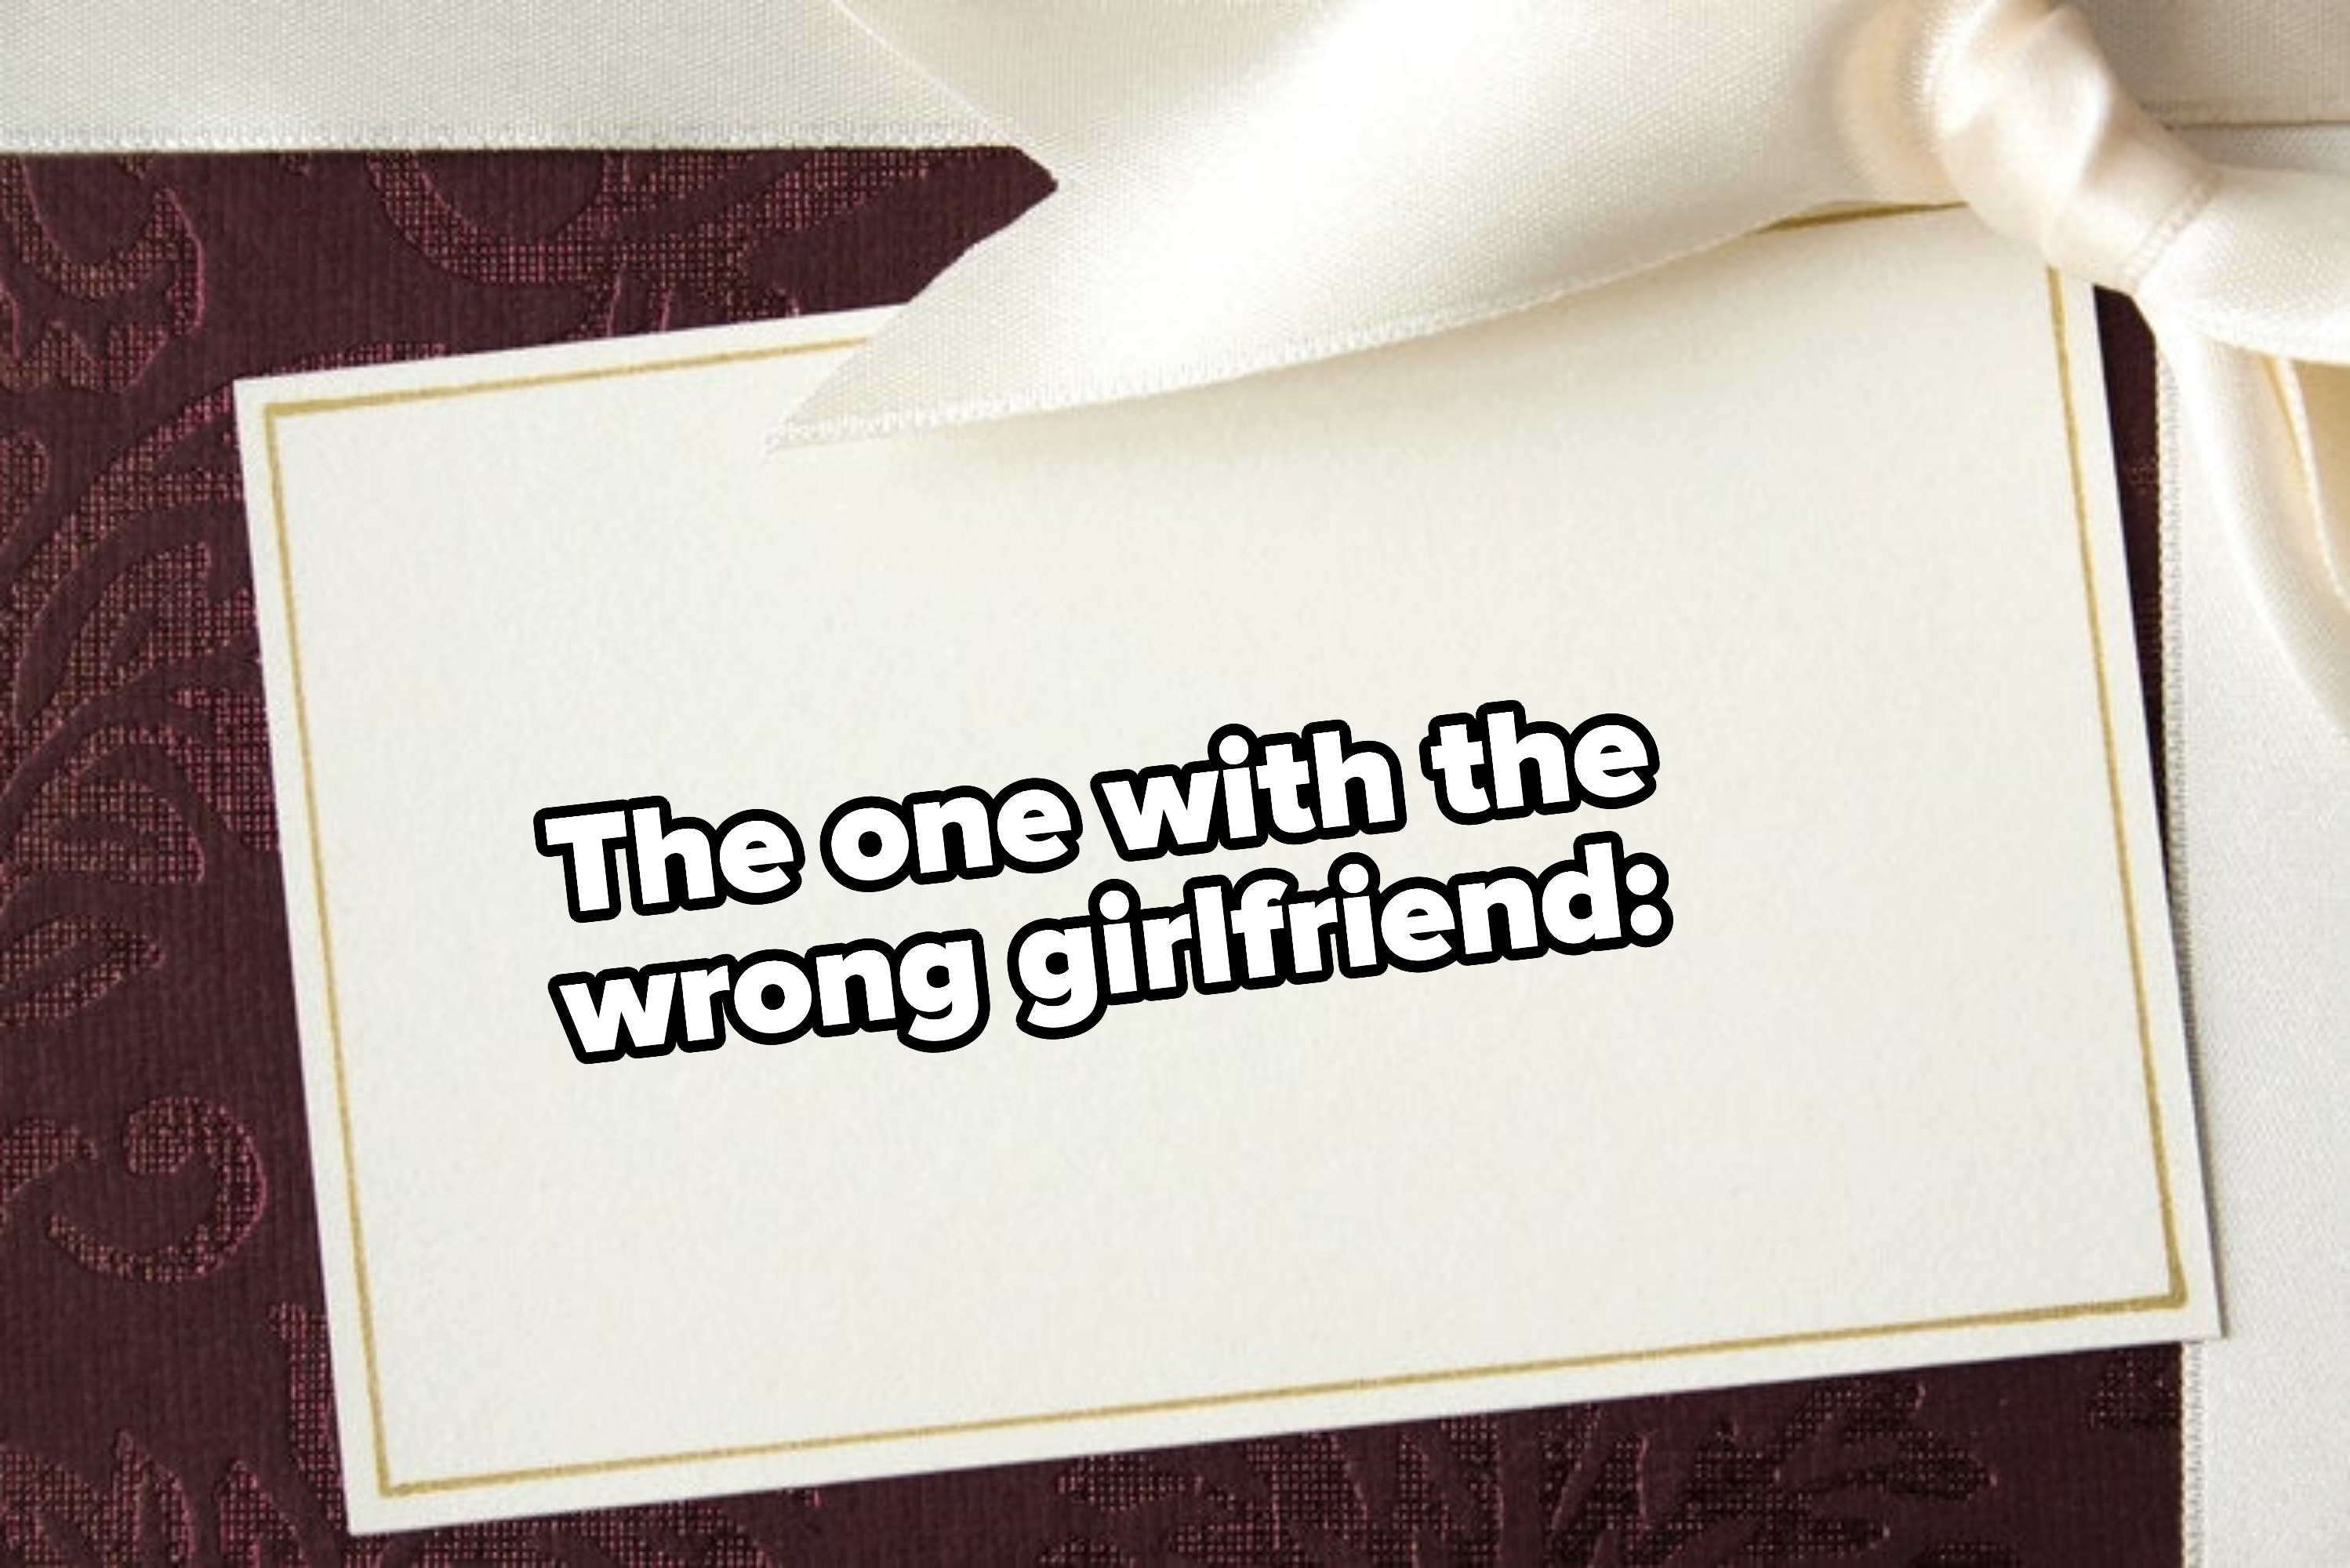 The one with the wrong girlfriend